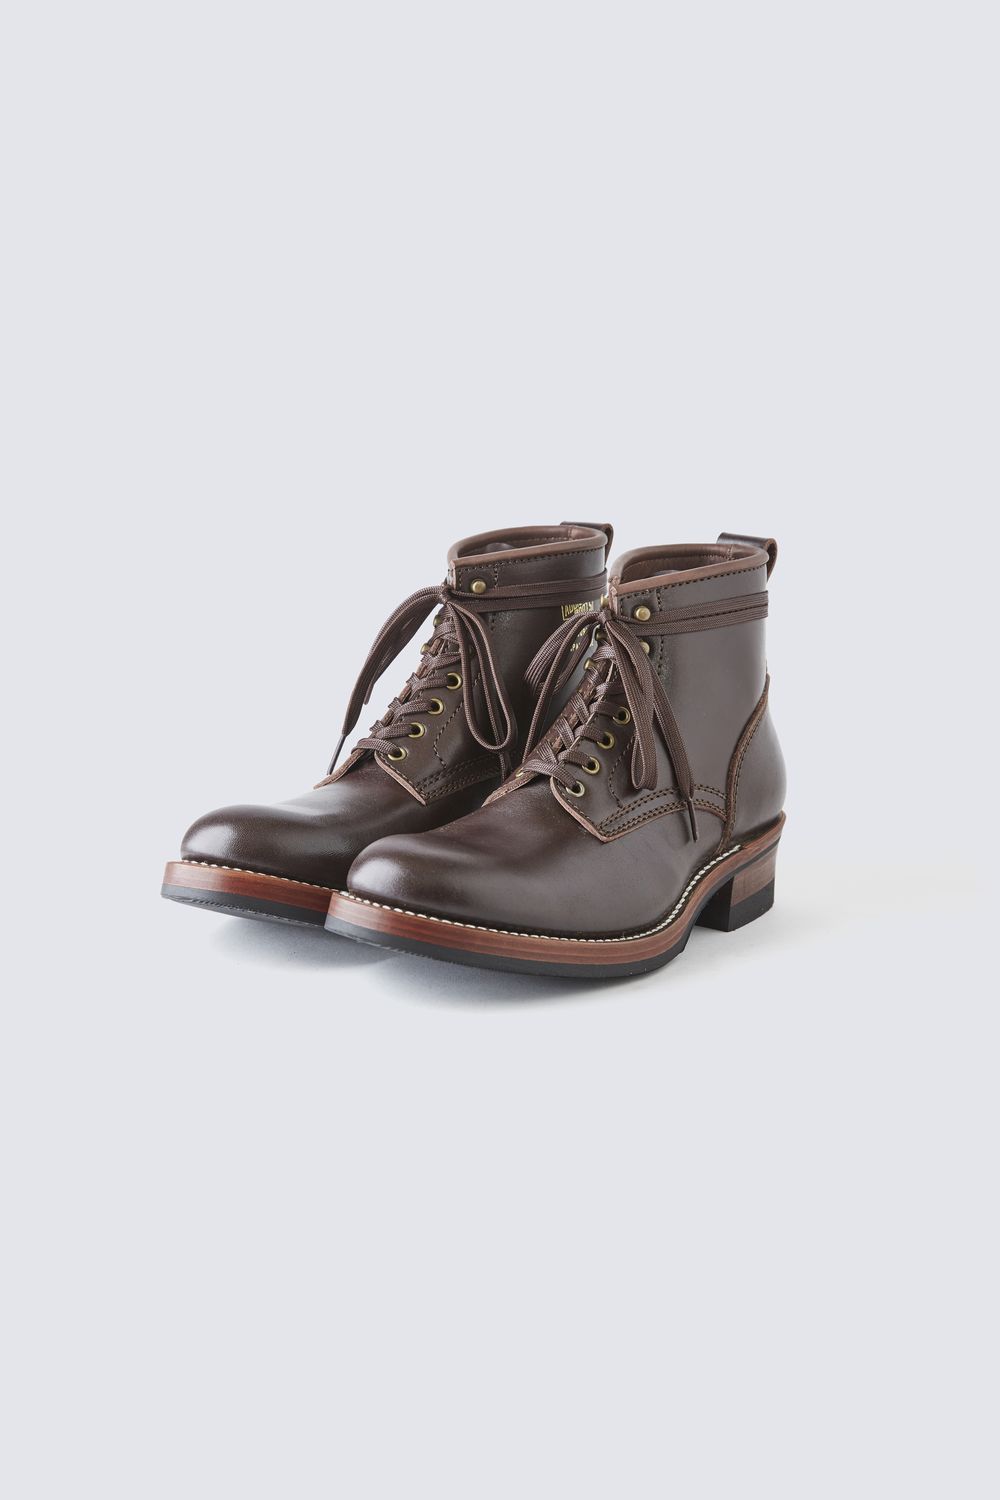 BUILT TO ORDER - AB-02 STEERHIDE LACE-UP BOOTS